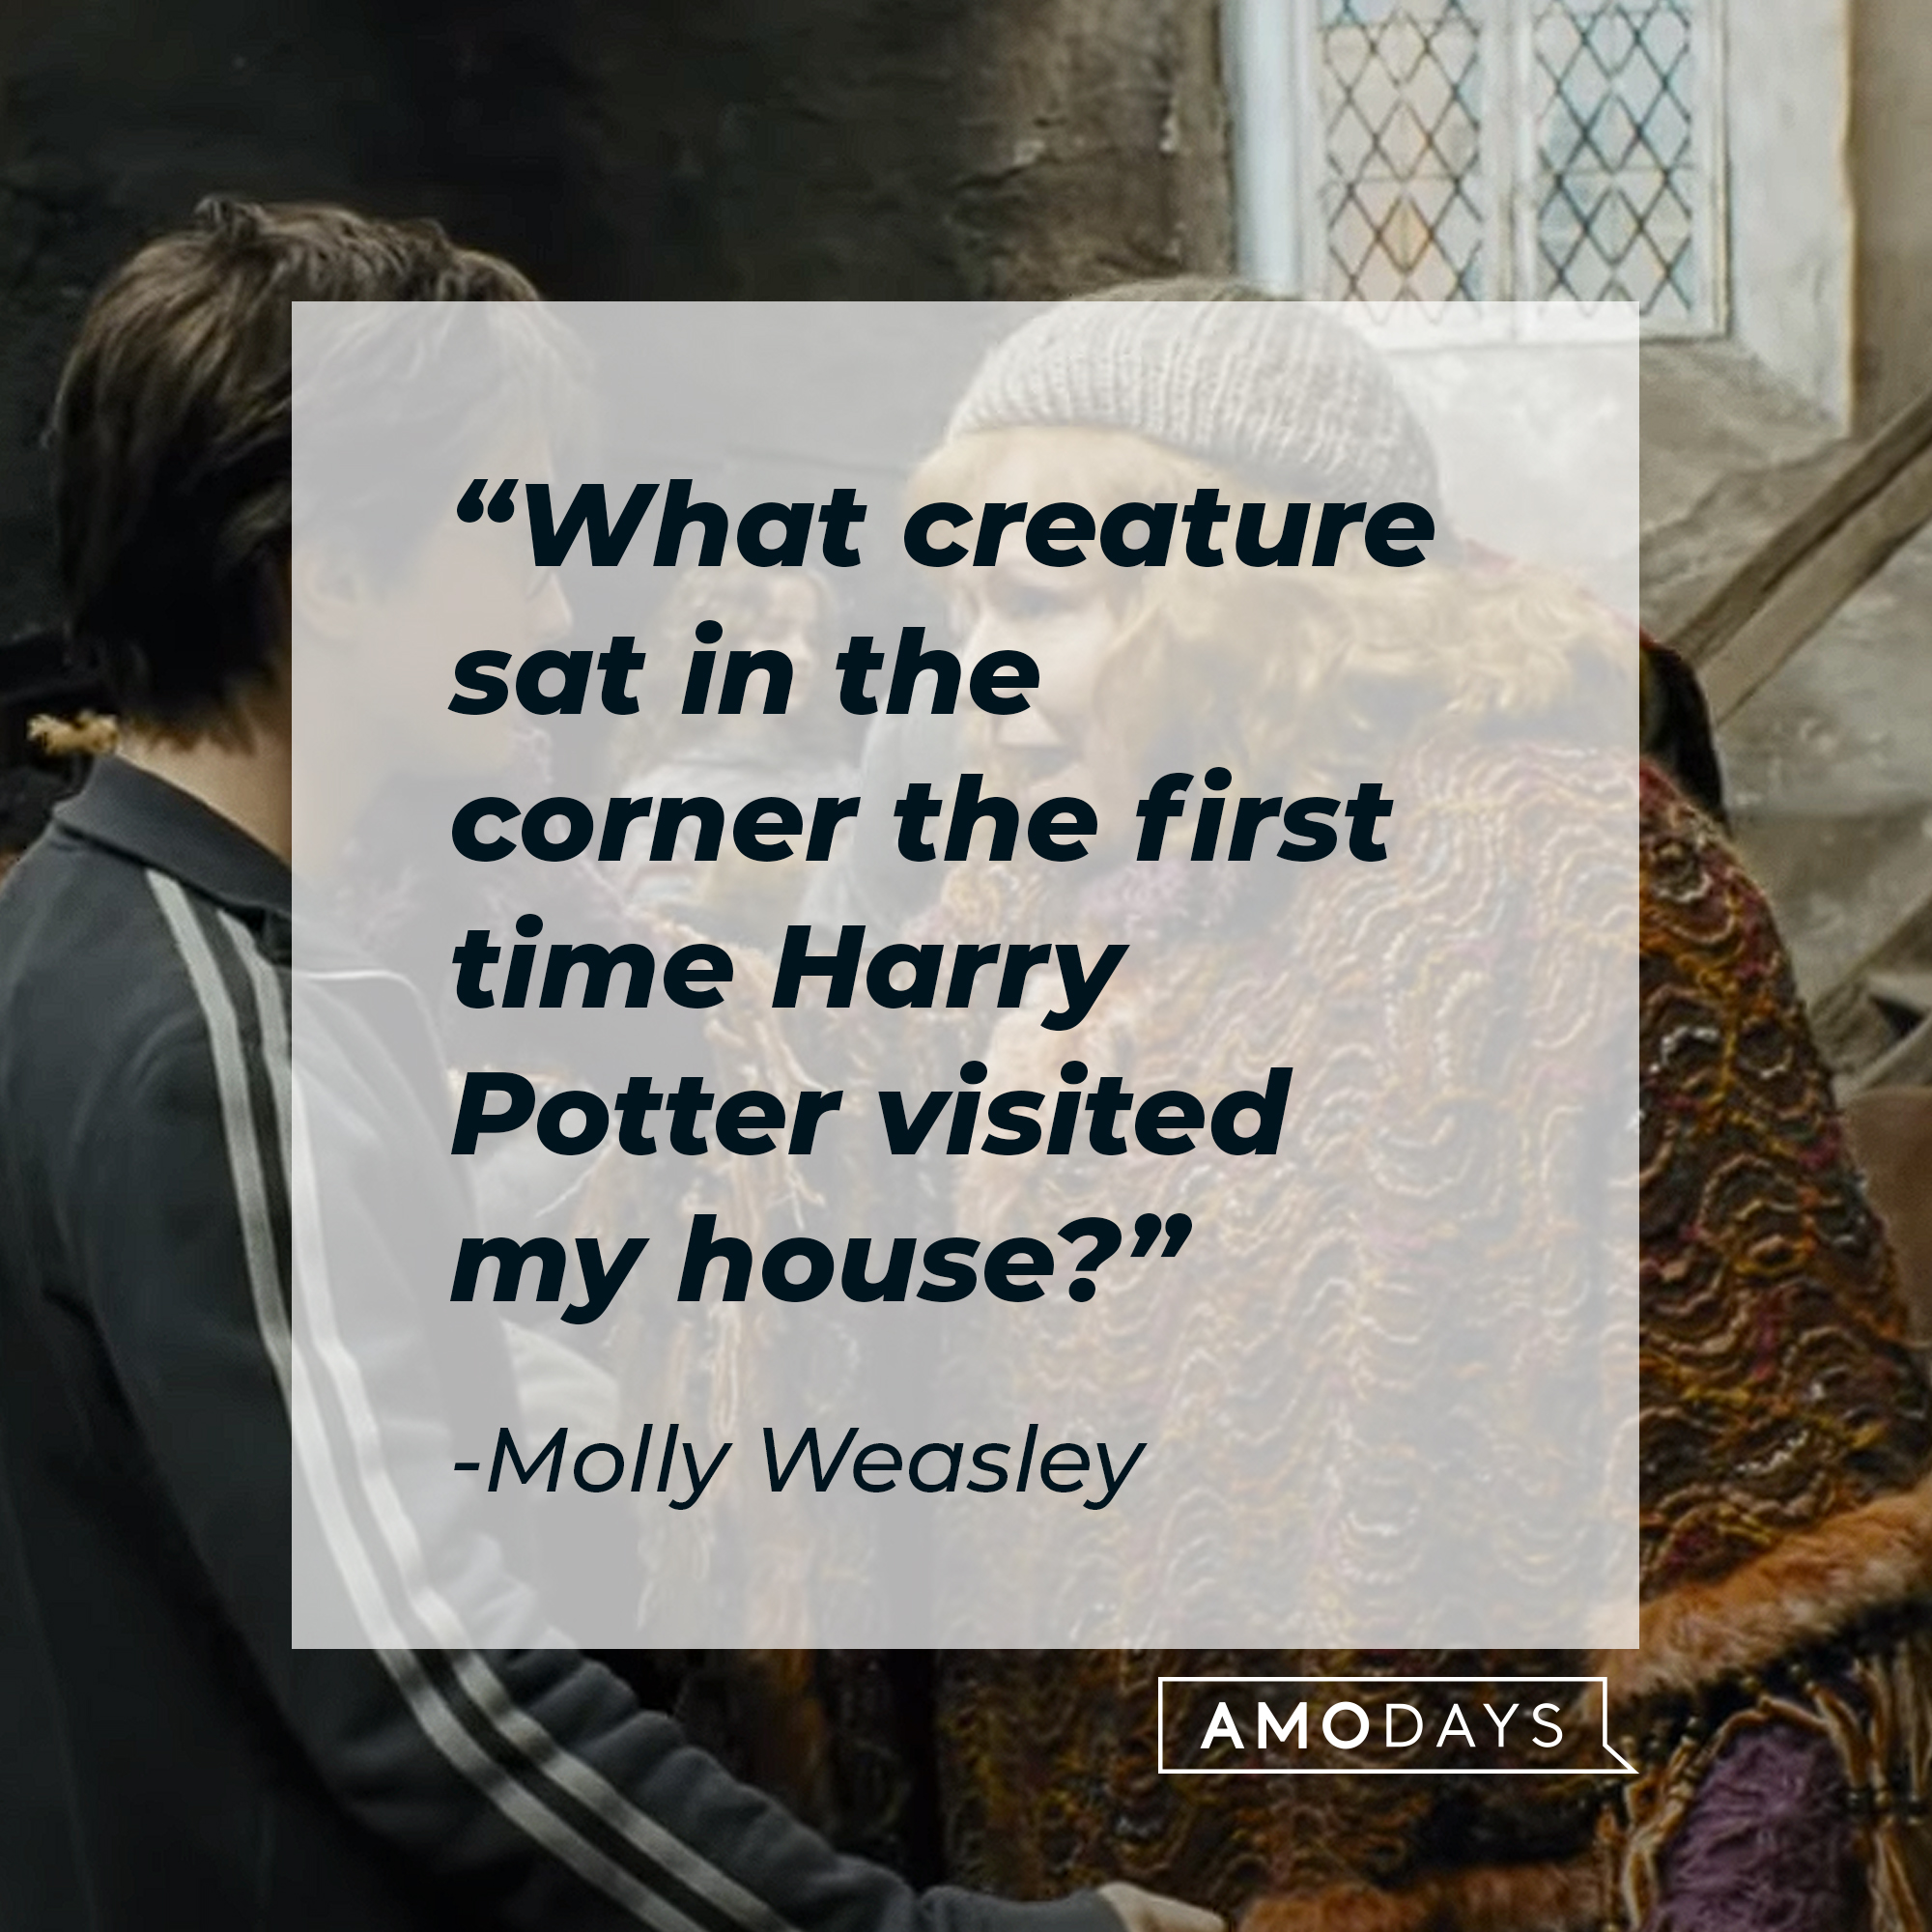 Molly Weasley's quote: "What creature sat in the corner the first time Harry Potter visited my house?" | Source: Youtube.com/harrypotter